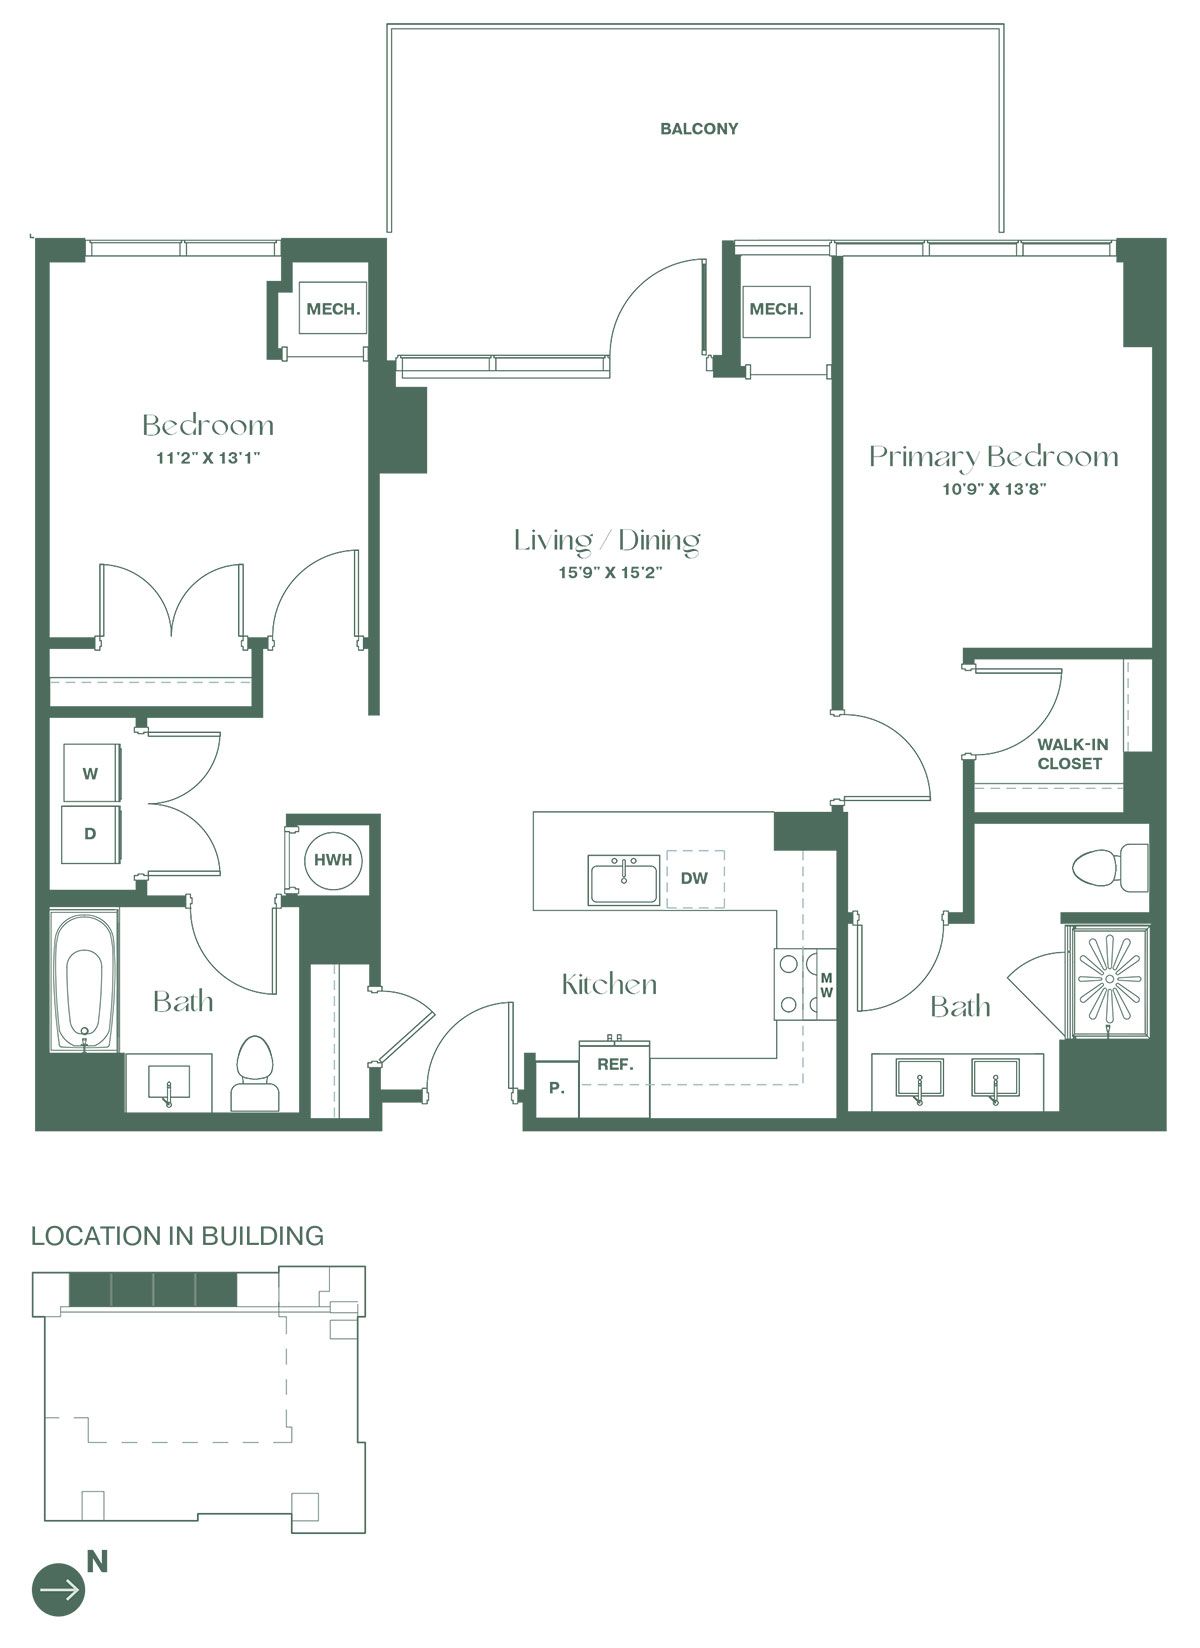 This floorplan for a two-bedroom, two-bathroom apartment at RVR at Xchange opens into a fully equipped kitchen with a dishwasher and pantry. Past the kitchen is a living and dining area with a spacious balcony, a full bathroom, and a bedroom with a closet. To the right is the entrance to the primary bedroom suite, with a full bathroom with double sinks.